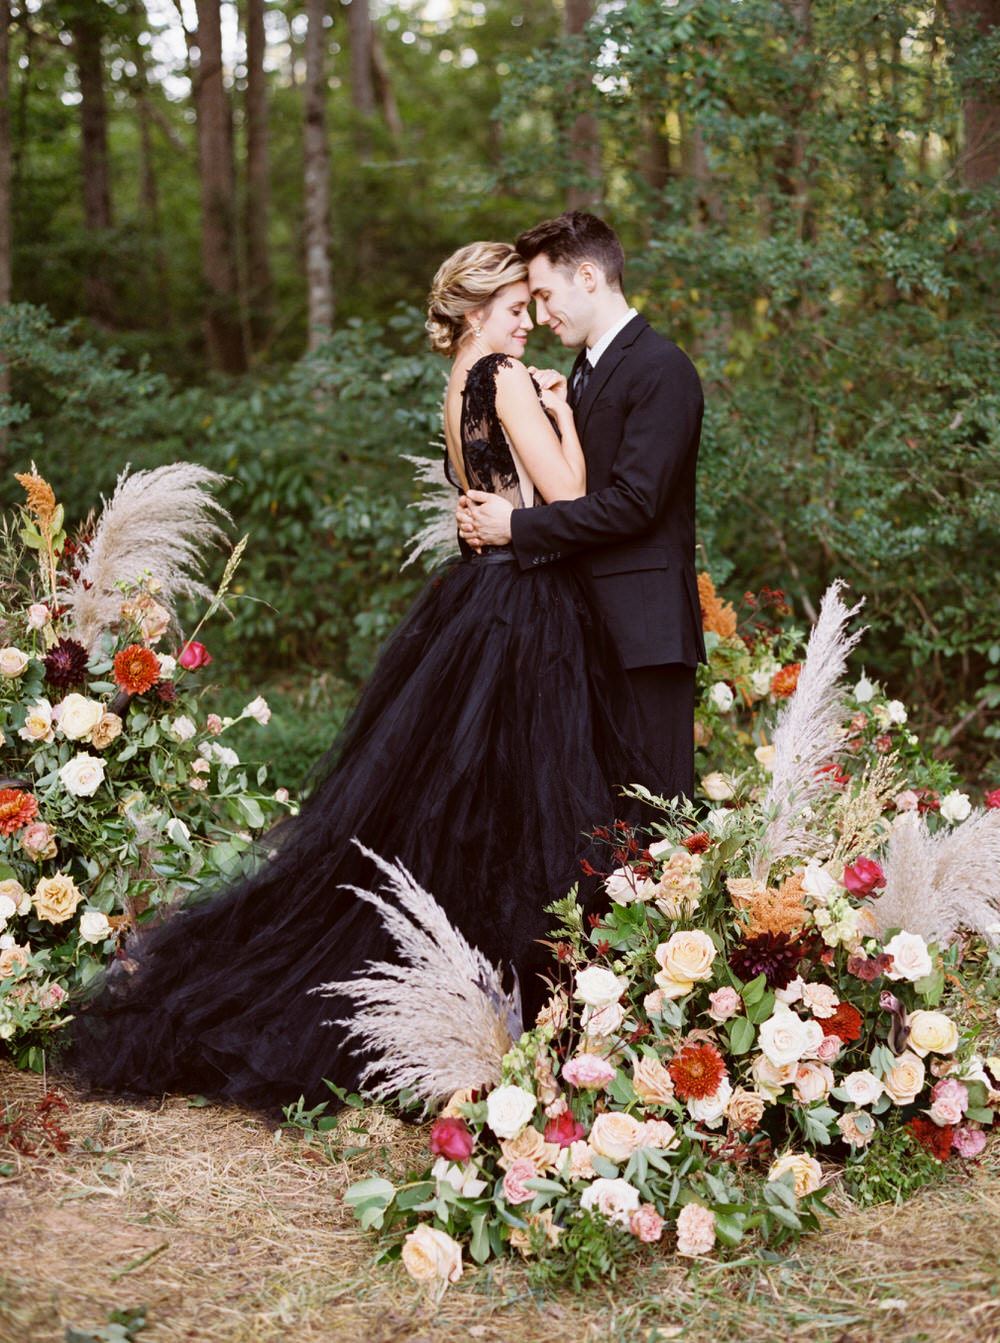 Inspirational chic wedding gowns